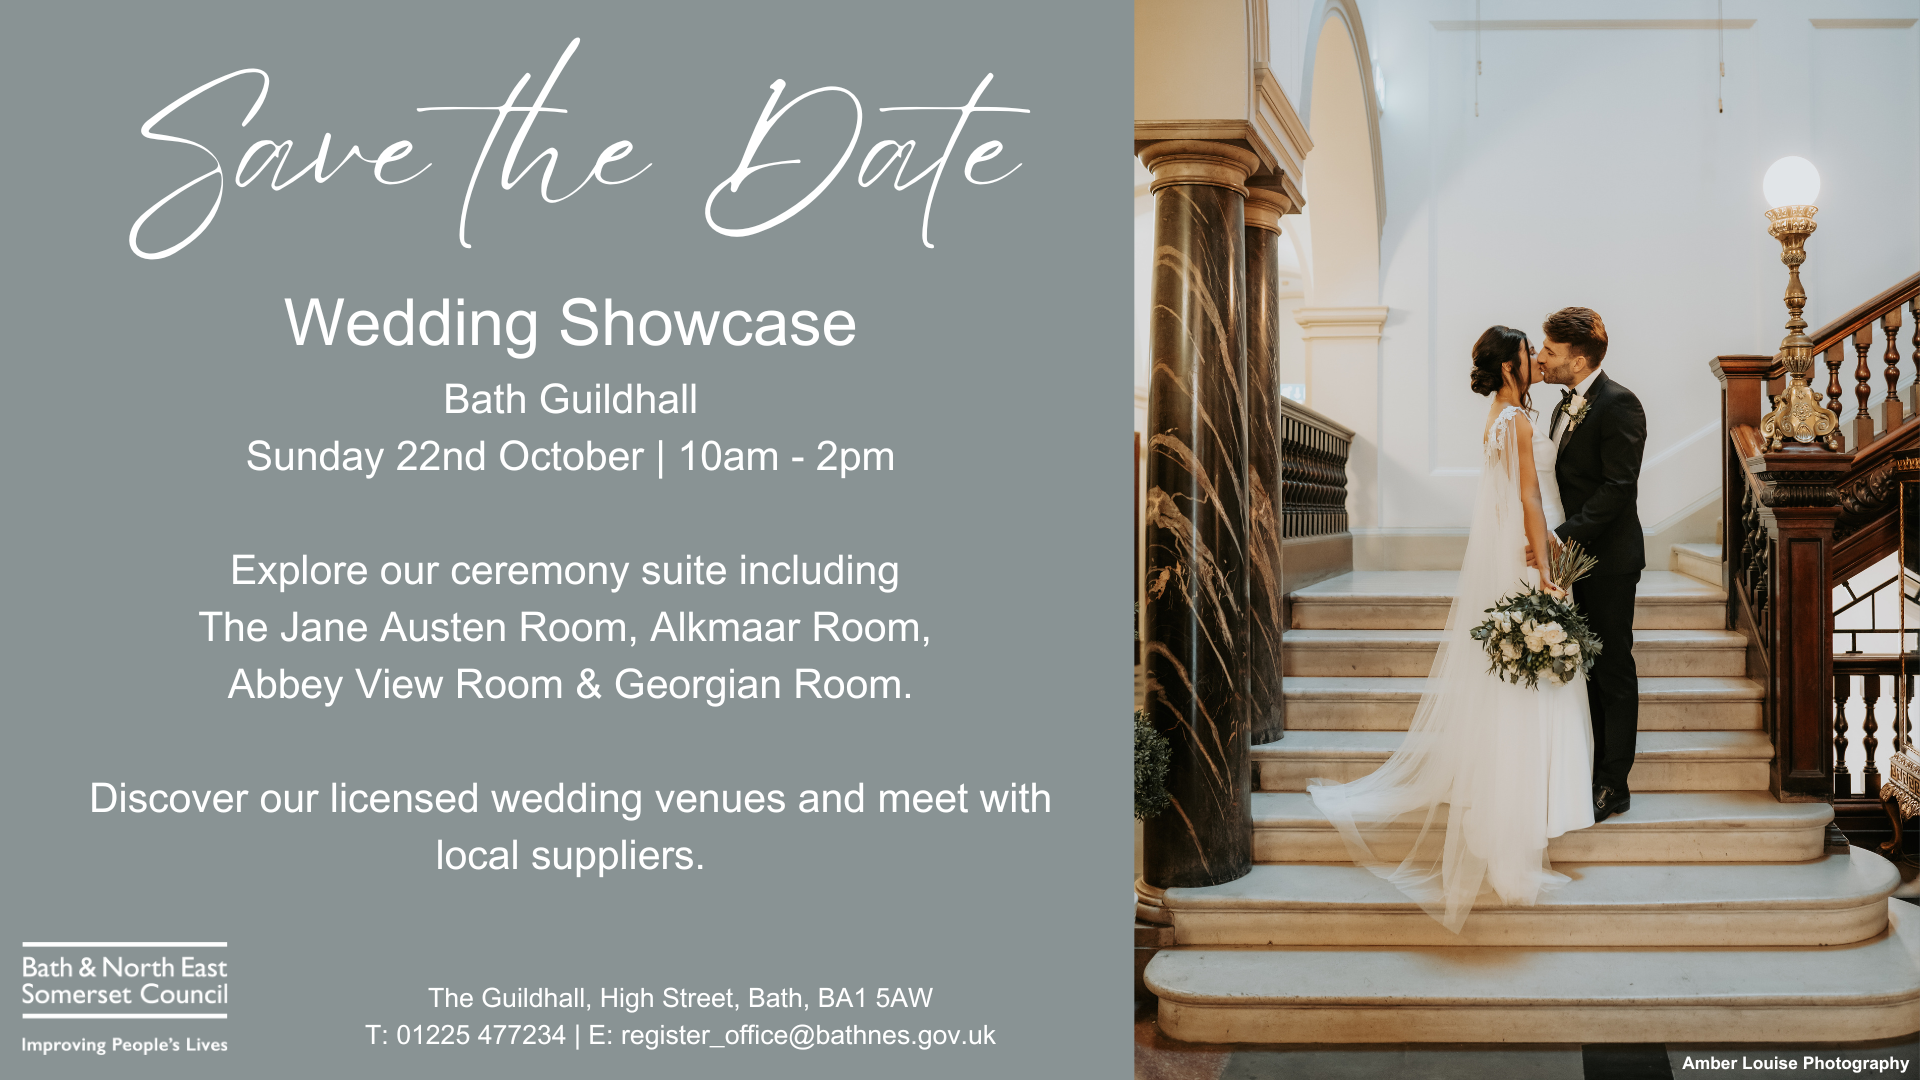 Save the date - for a wedding showcase at Bath’s Guildhall